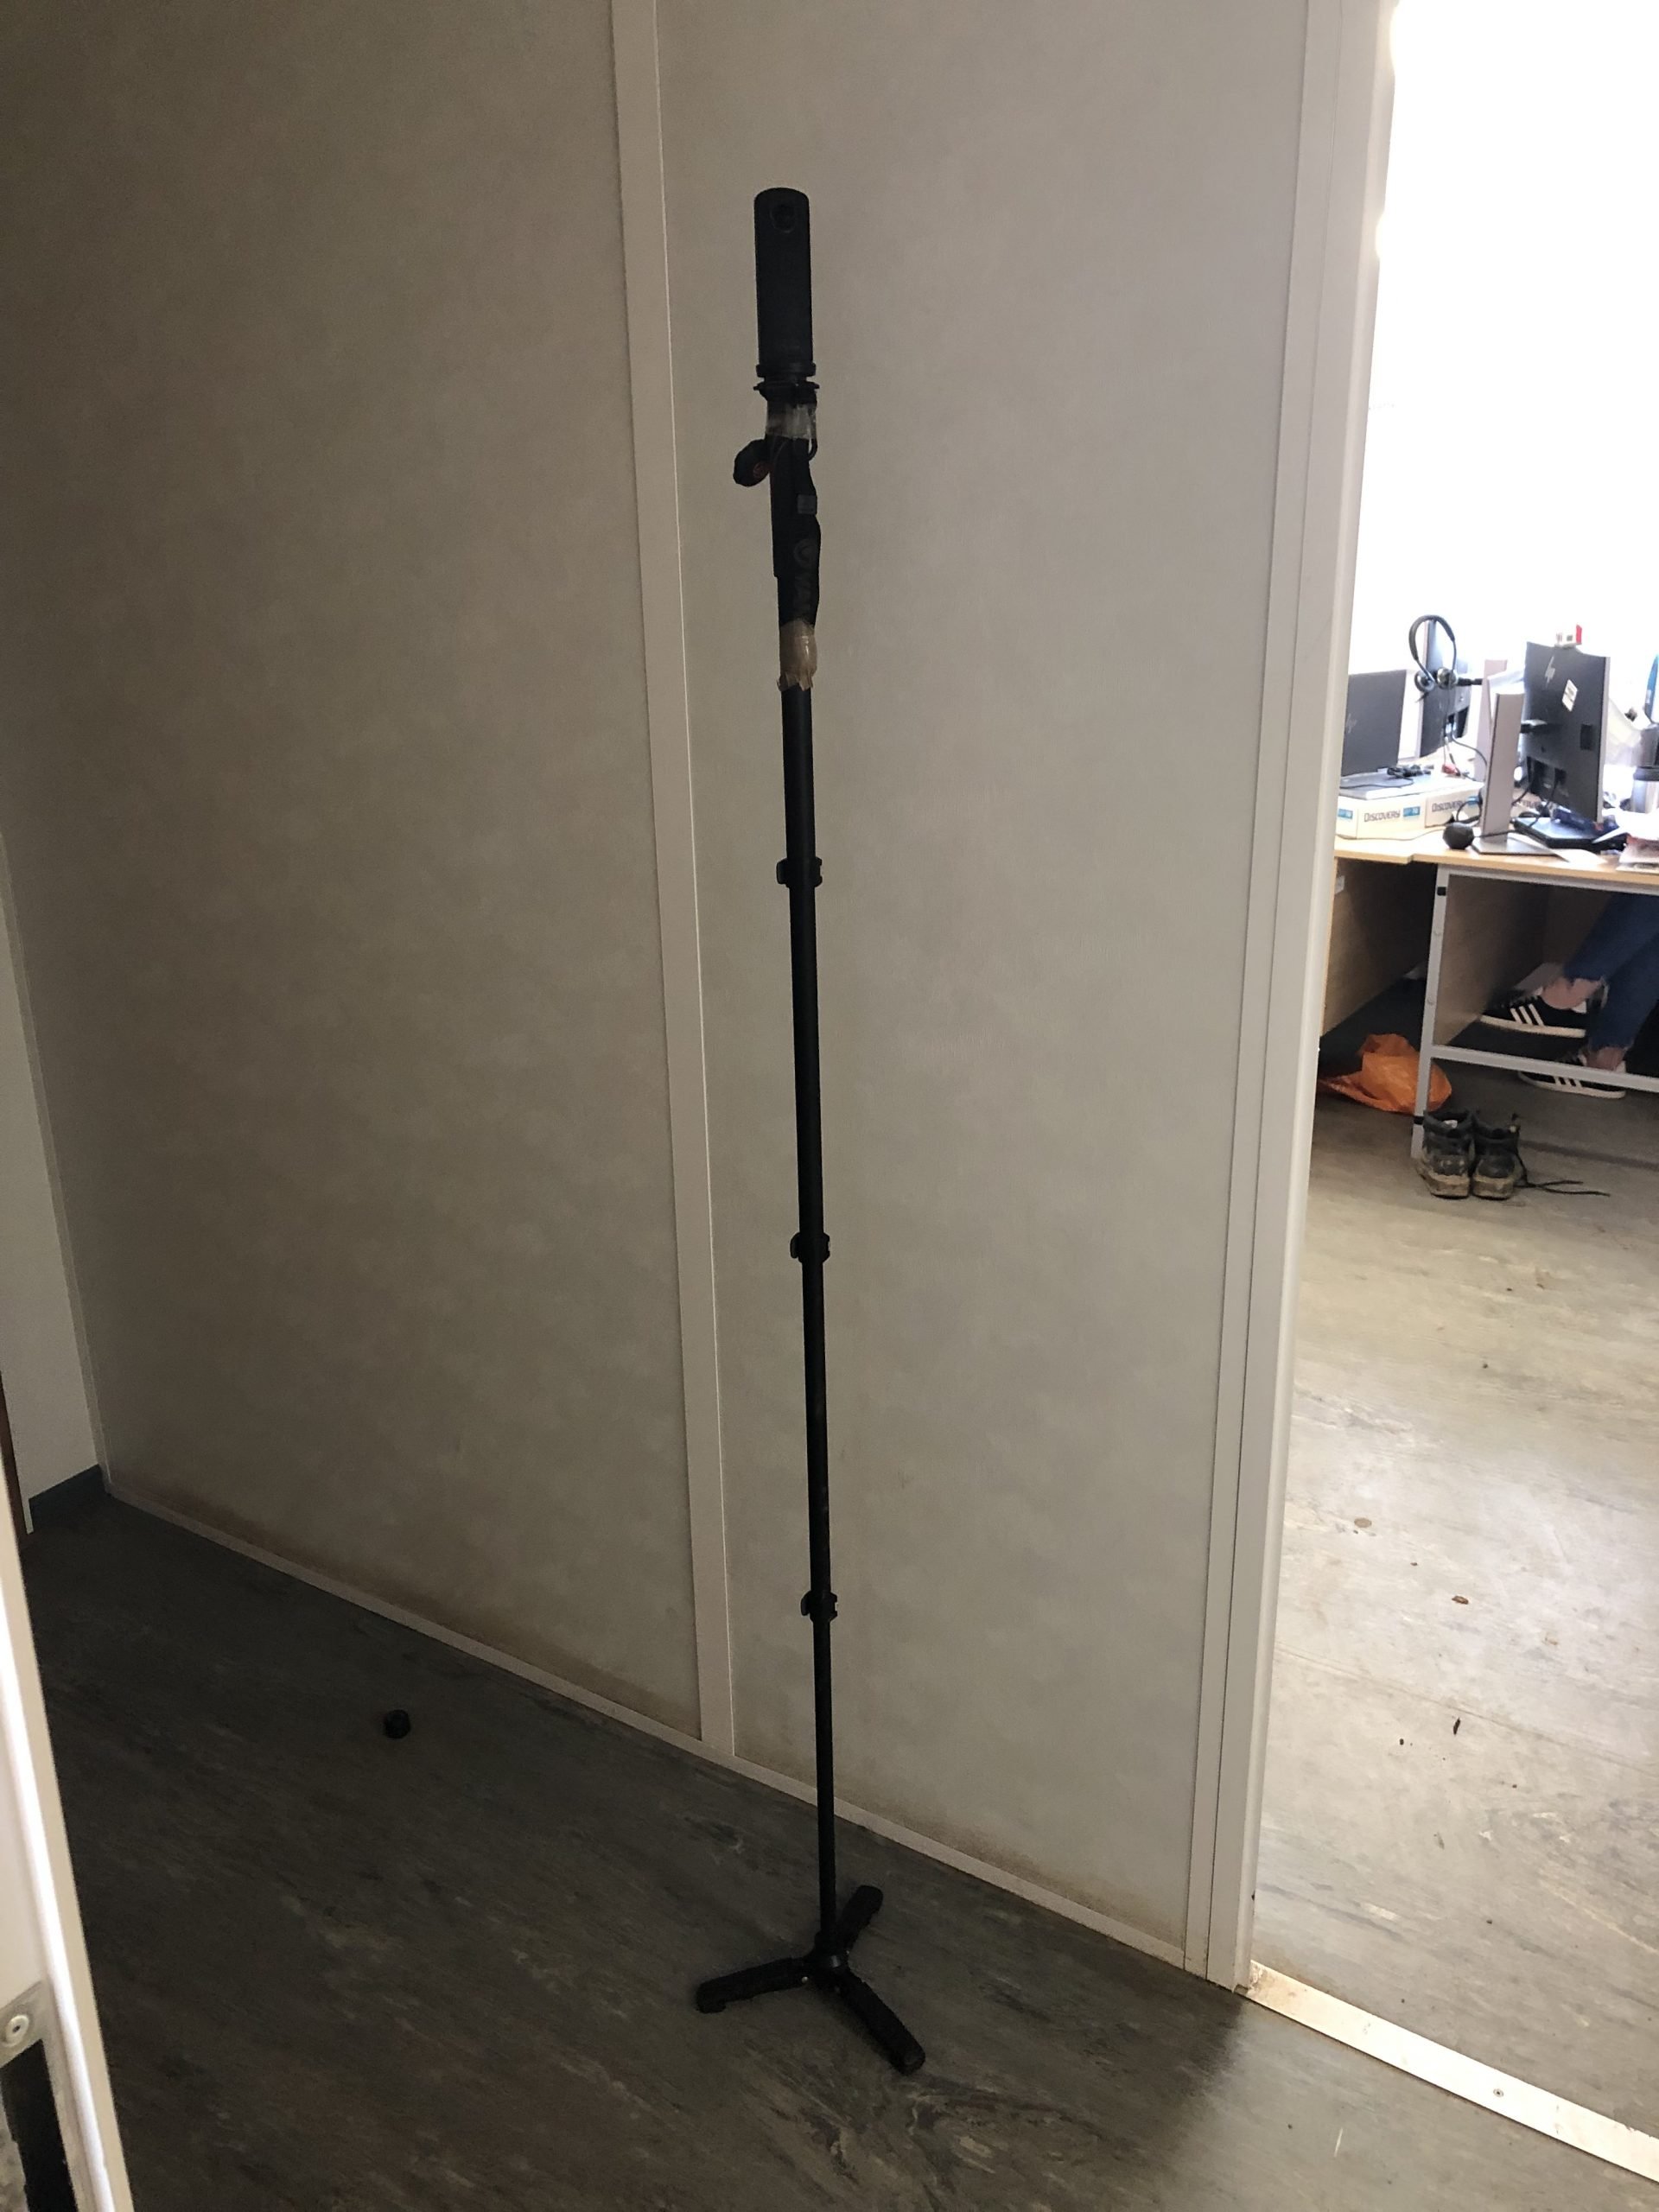 Picture of a camera that is attached to a extendable tripod pole